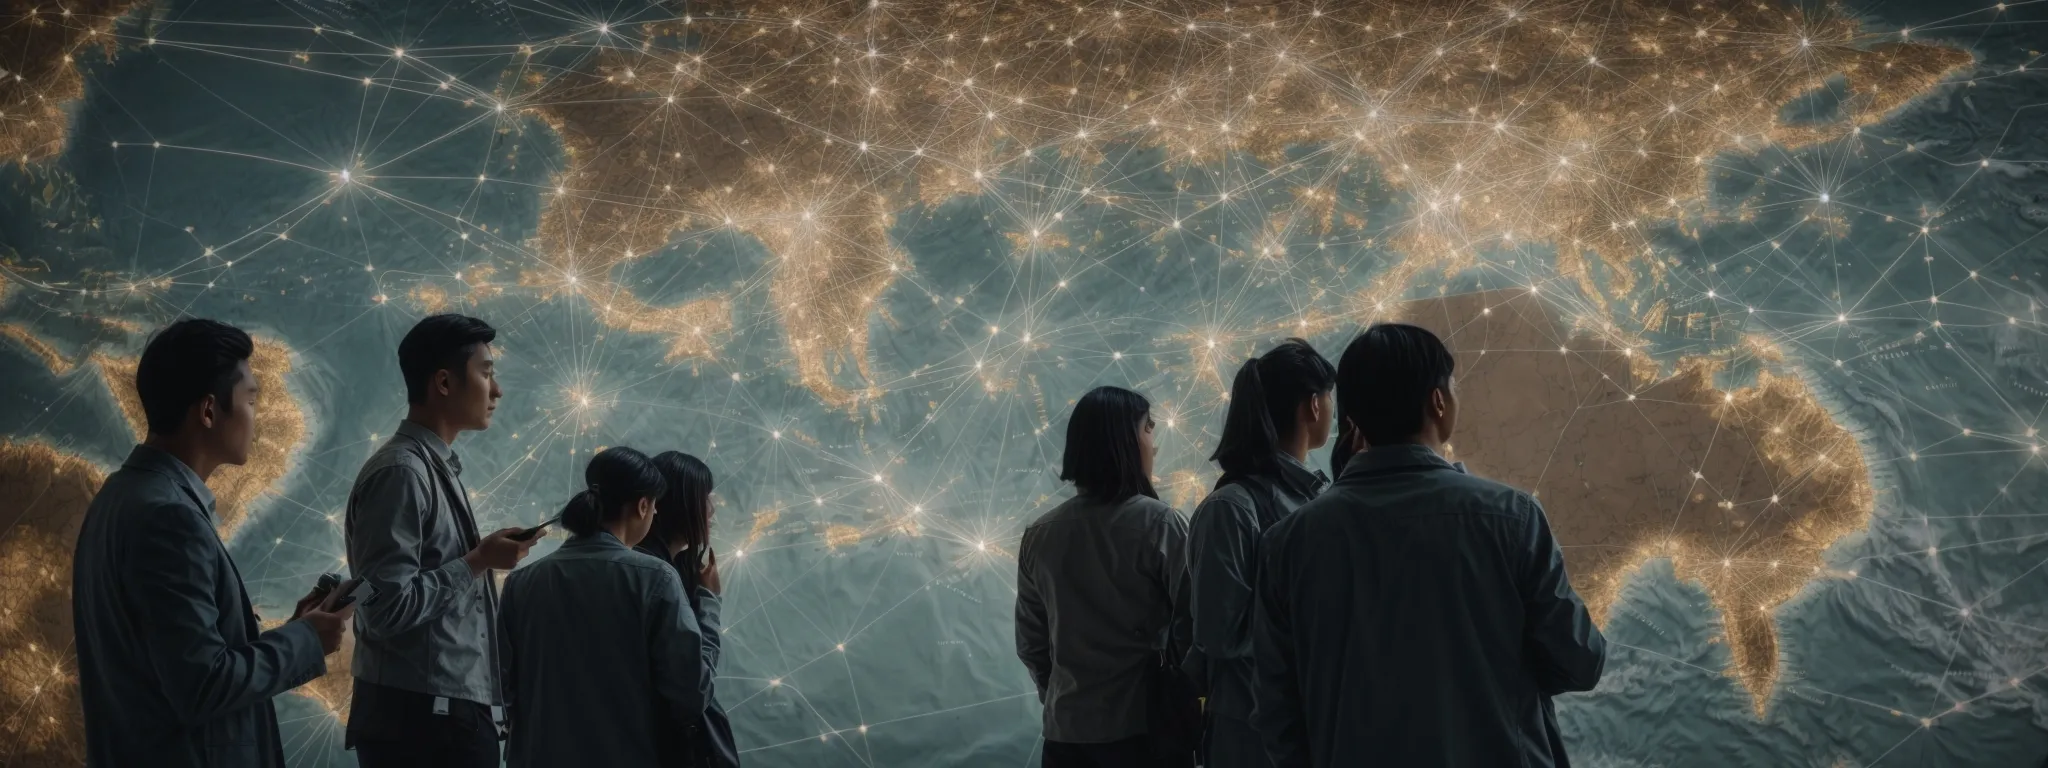 a team of digital marketers analyzes a global map displaying various interconnected nodes symbolizing a network of international links.